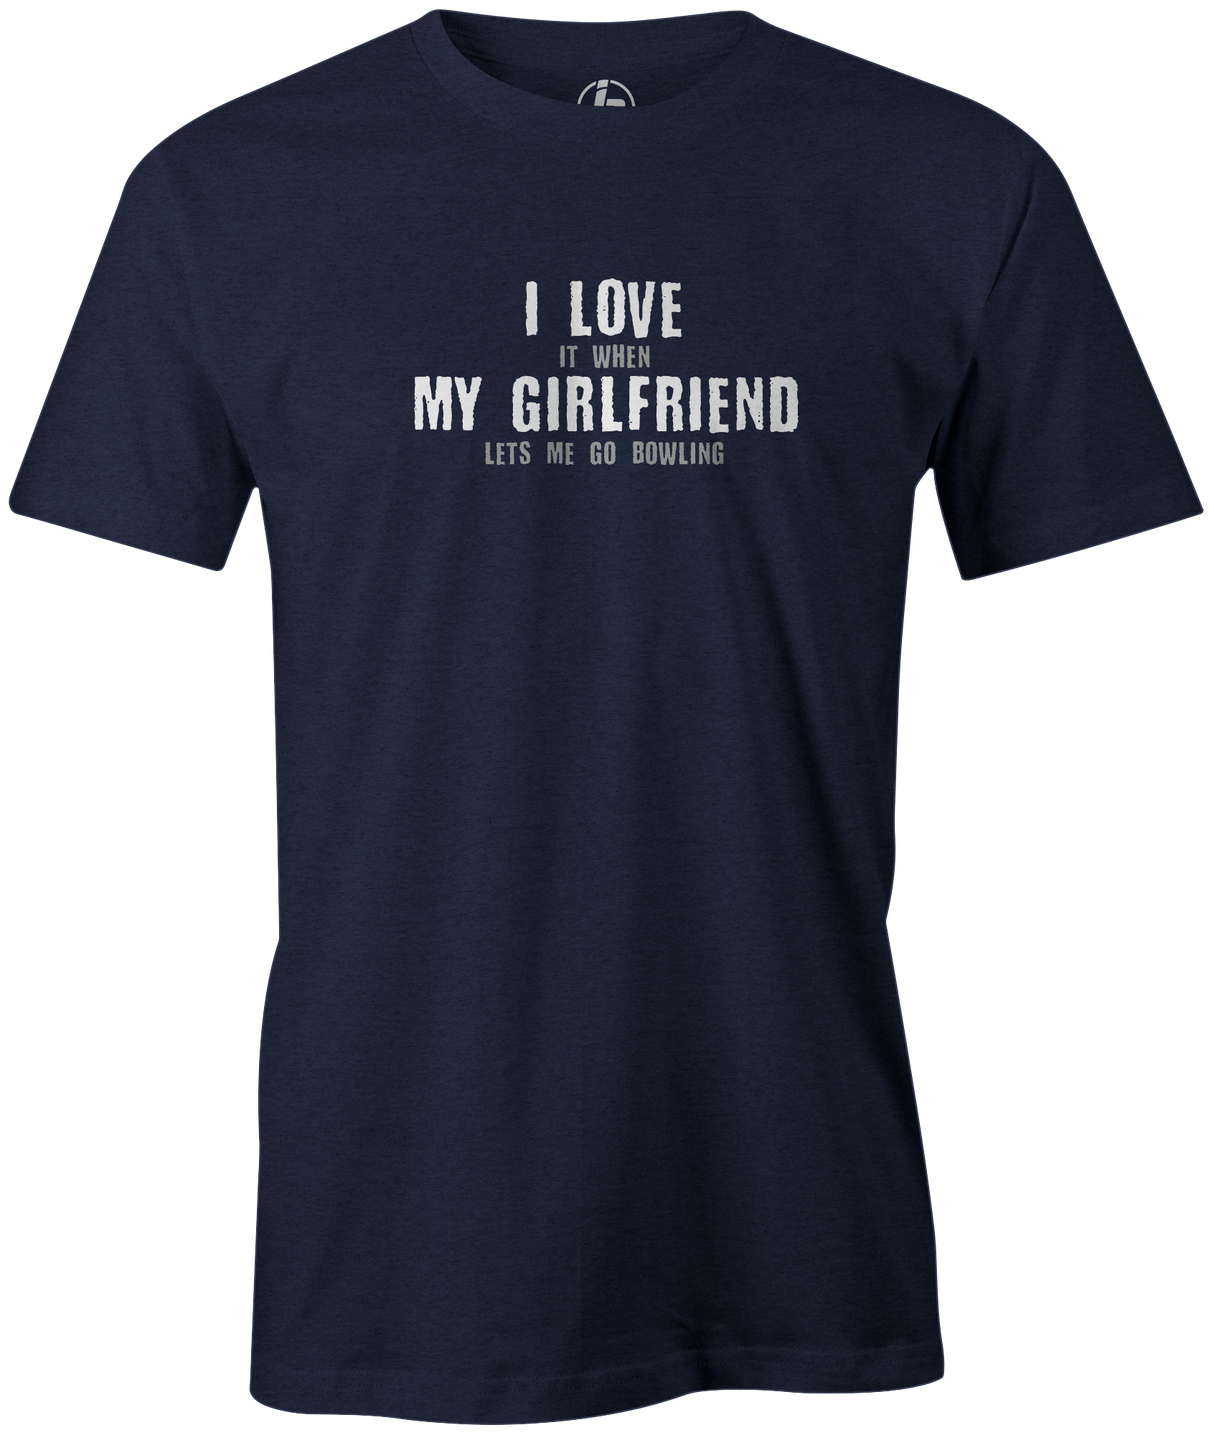 It's always nice to have someone who respects your bowling time. Rock this sharp Bowling girlfriend t-shirt and show the world how cool she is. This tee is the perfect gift. black, navy or charcoal. gift, birthday present. charcoal, navy, blue. tees, discount, cheap, free shipping. coupon code. discount. navy